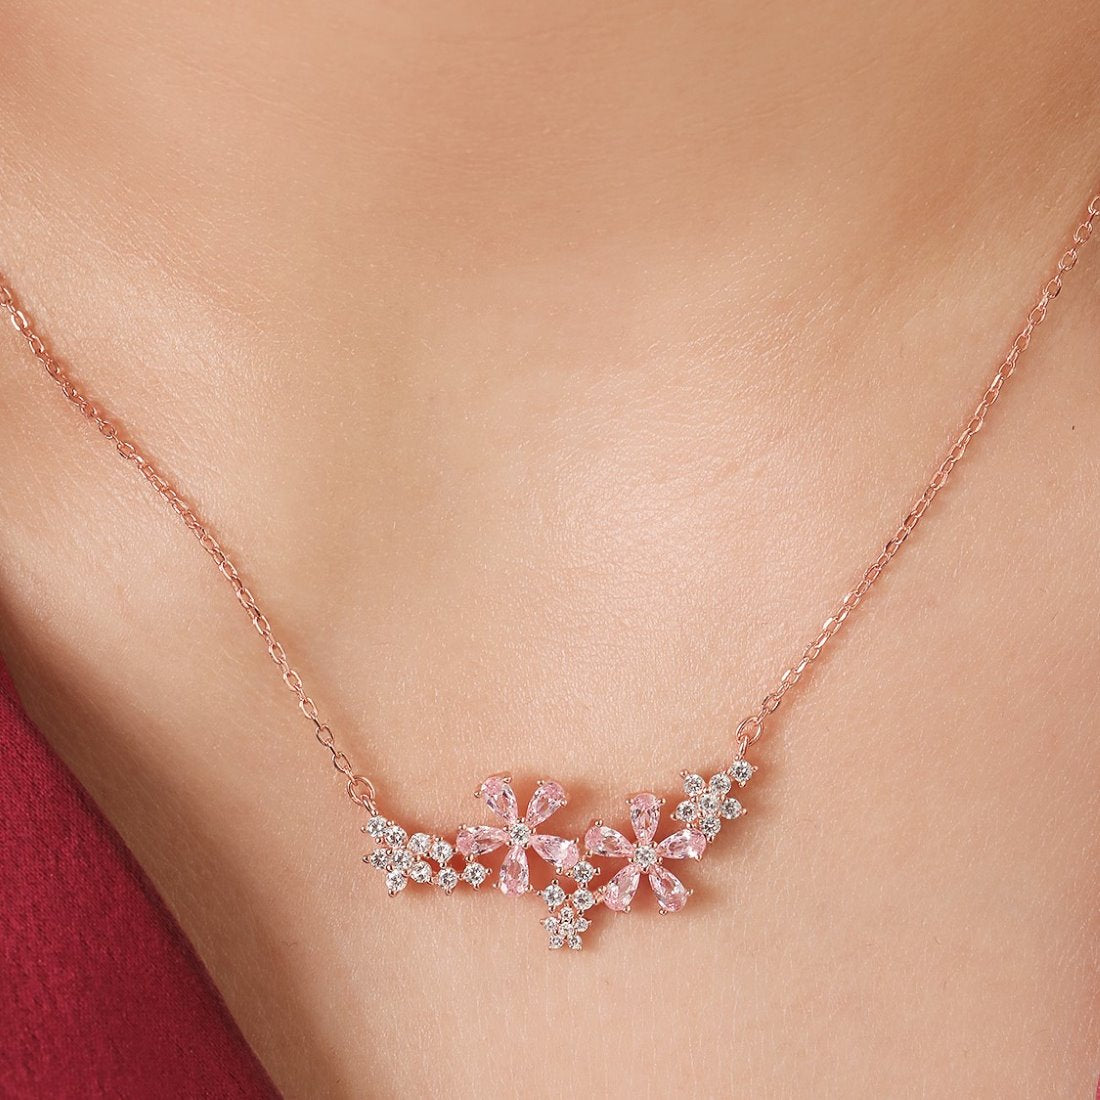 Blooming Blossoms 925 Sterling Silver Rose Gold-Plated Flower Necklace